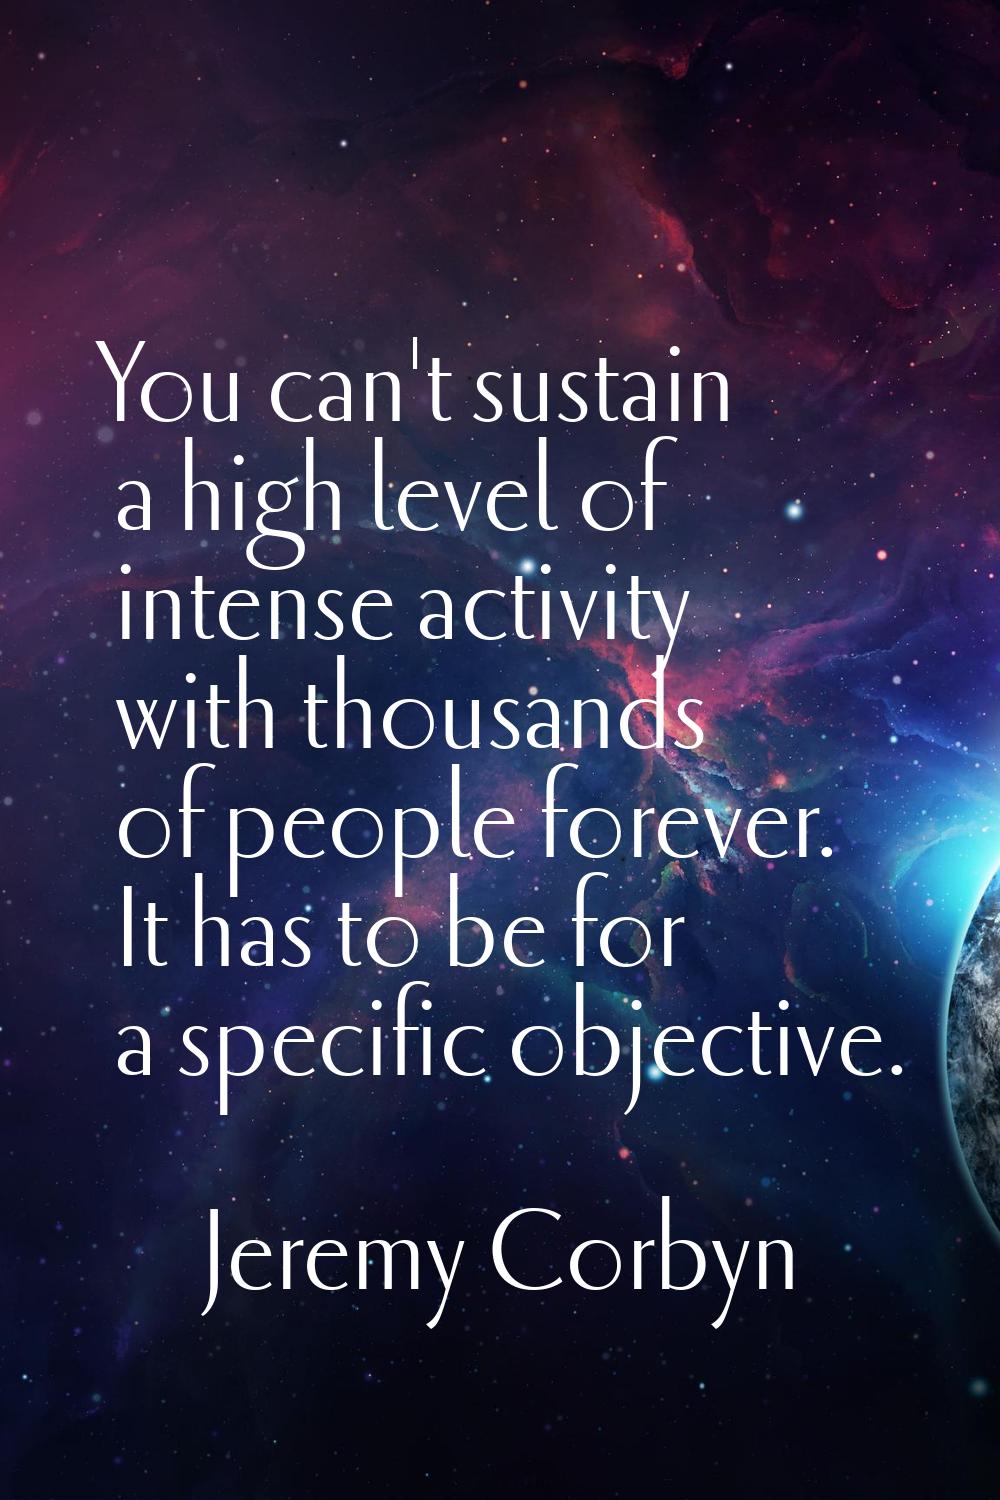 You can't sustain a high level of intense activity with thousands of people forever. It has to be f